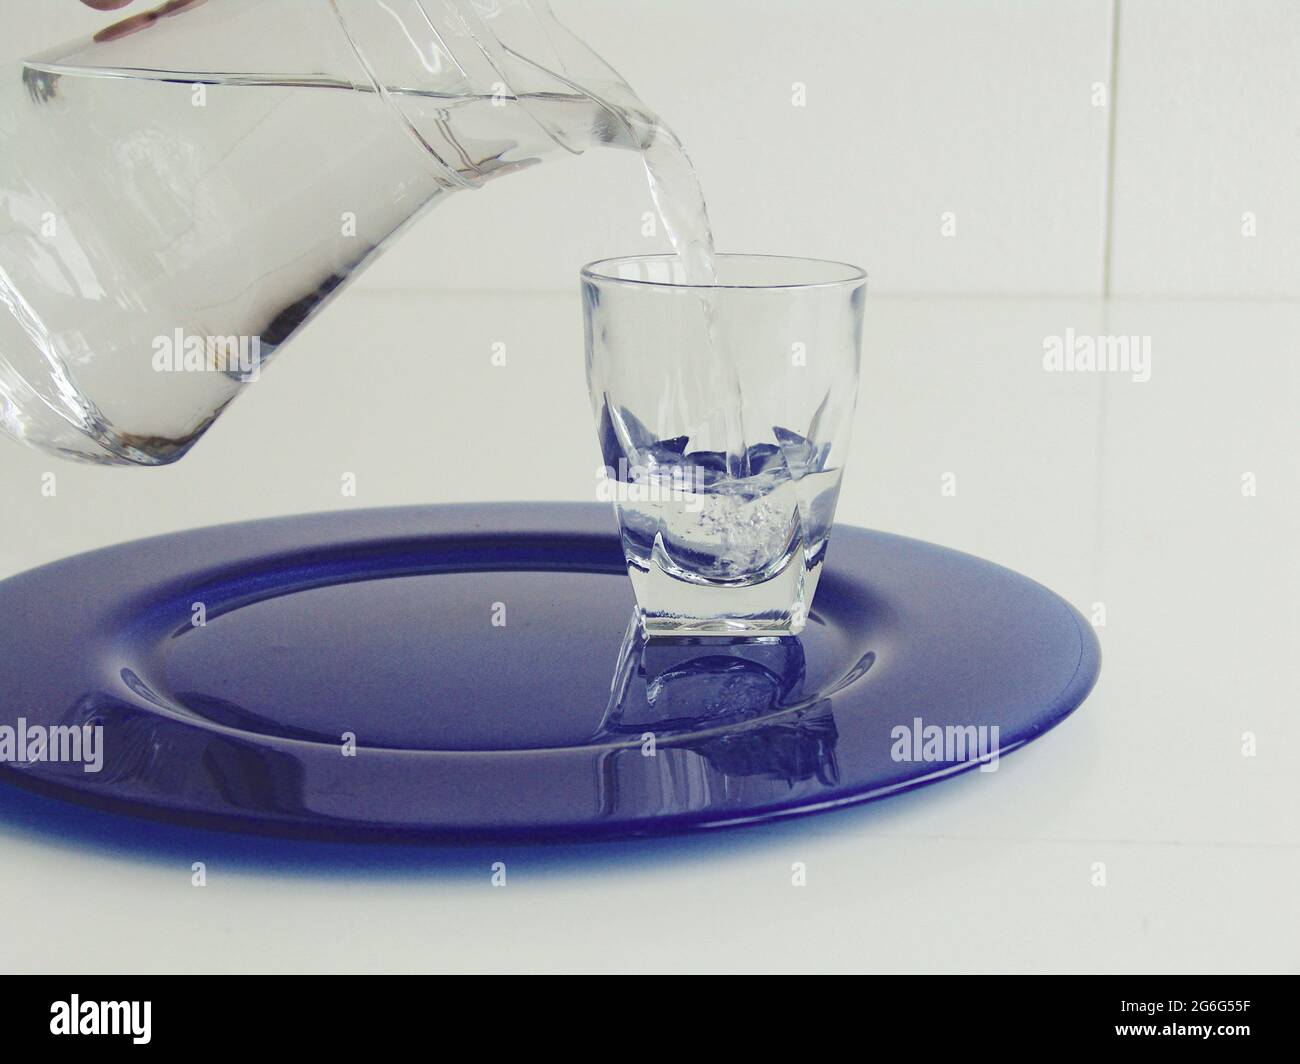 https://c8.alamy.com/comp/2G6G55F/pouring-water-into-a-water-glass-with-a-carafe-2G6G55F.jpg